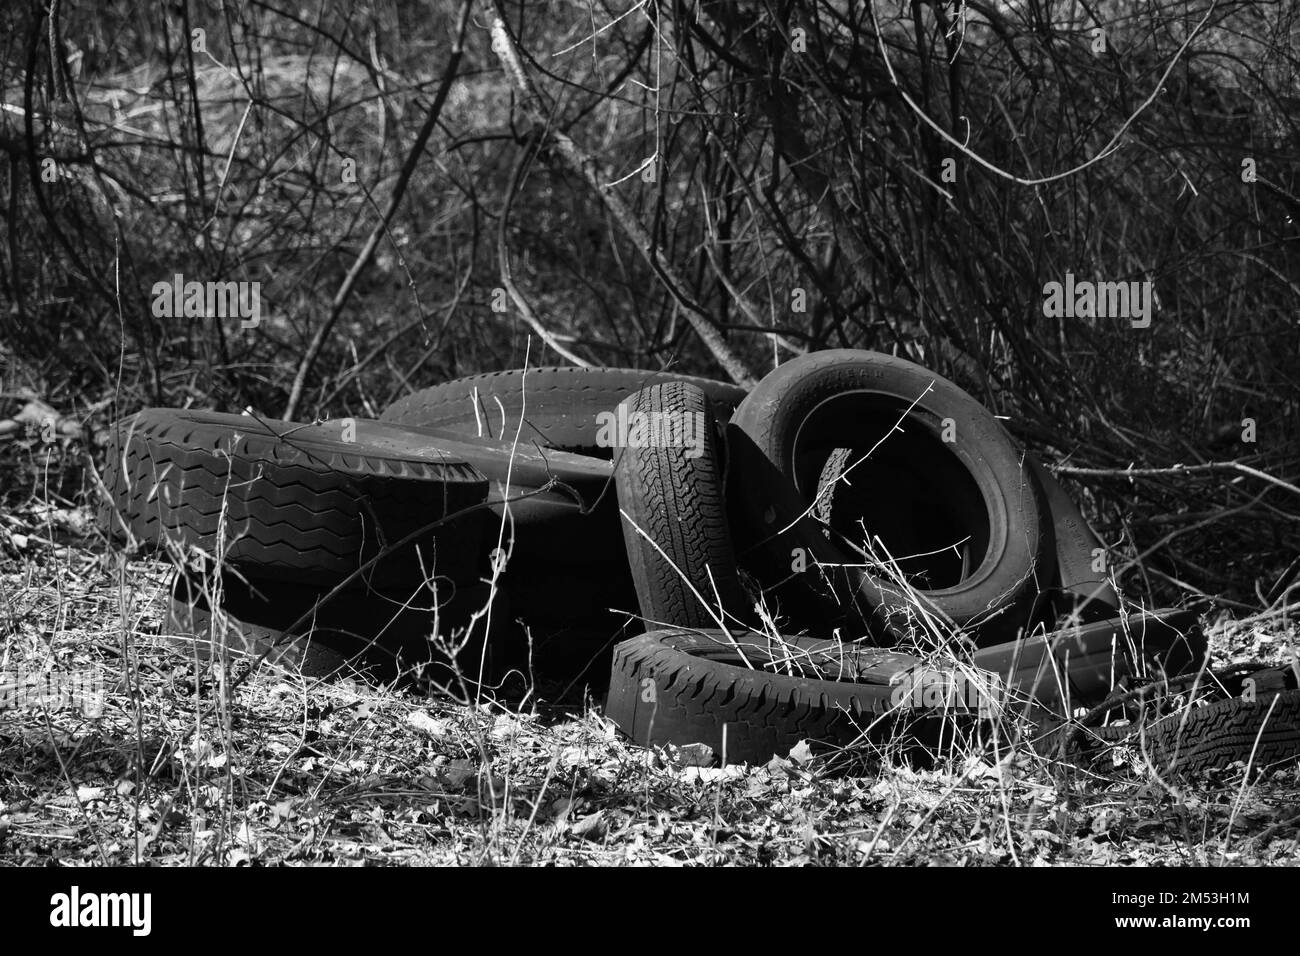 A grayscale shot of rubber tires thrown away in the wilderness Stock Photo